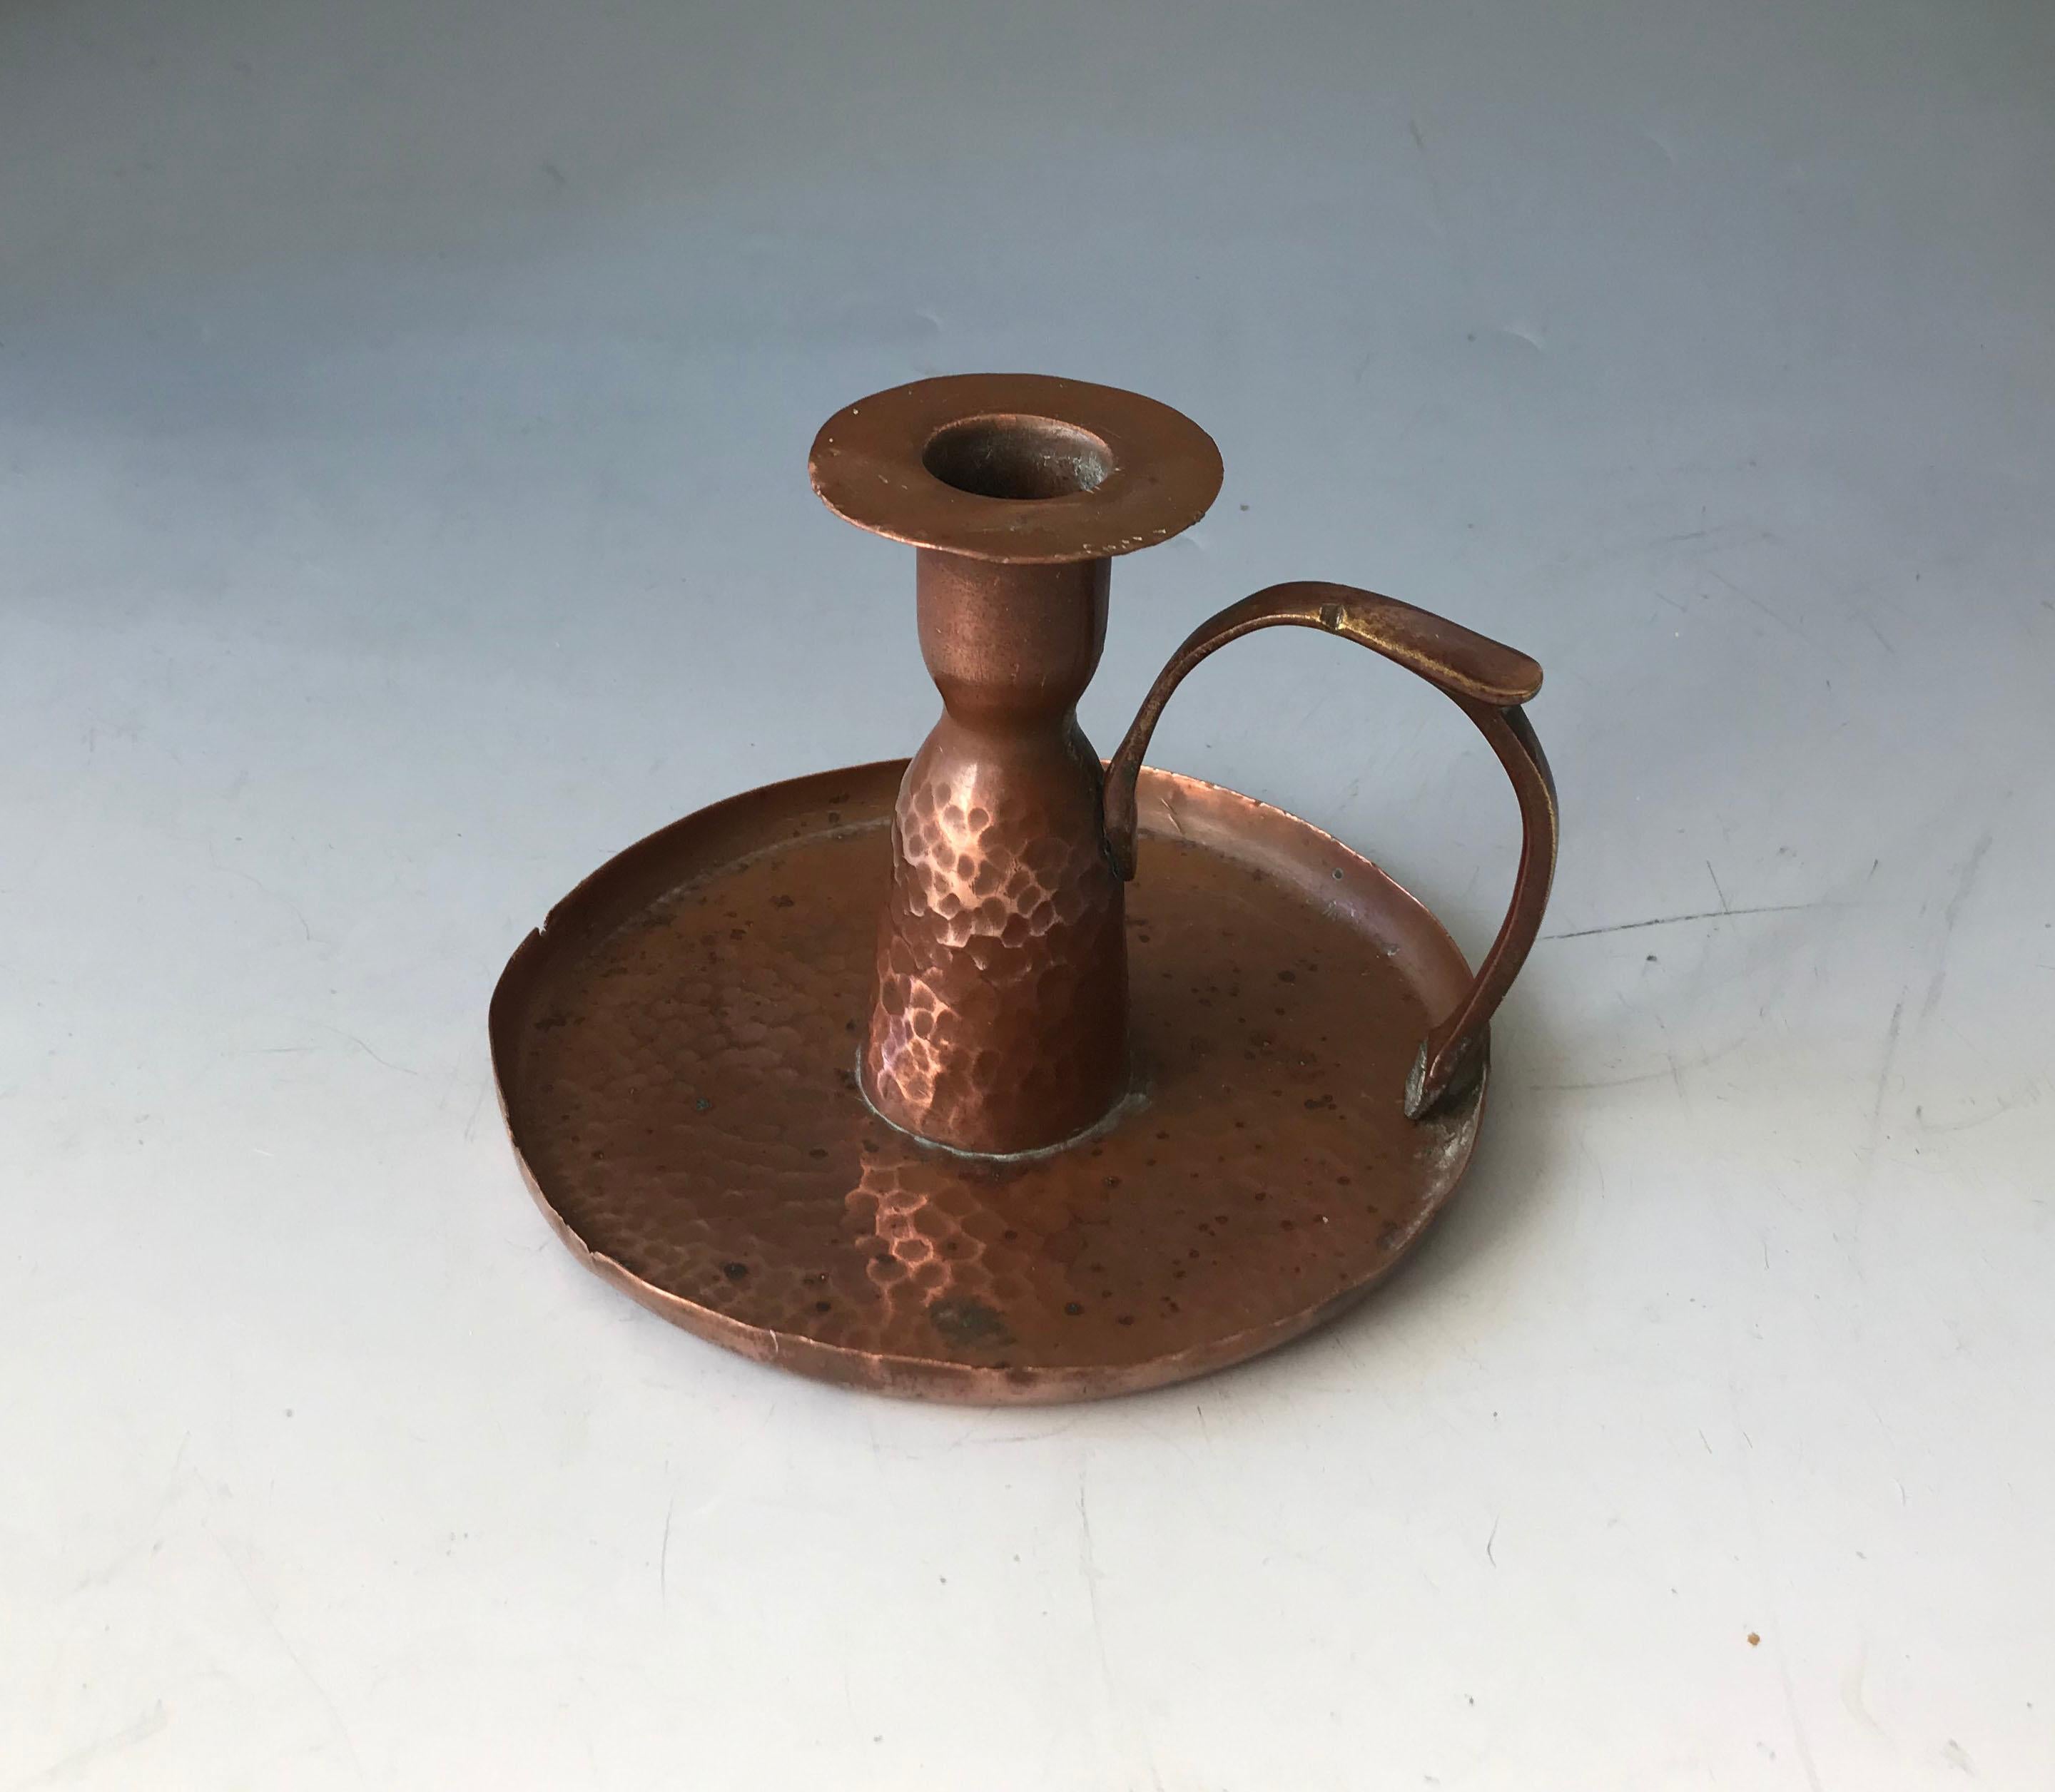 Fine Arts & crafts Hammered copper candle holder
A particularly Elegant and rare hammered copper and brass candle stock holder 
Period 1920`s A scarce piece : Makers monogram on base
Condition fine
Size 7 x 5 inches 17 x 12 cm.
    